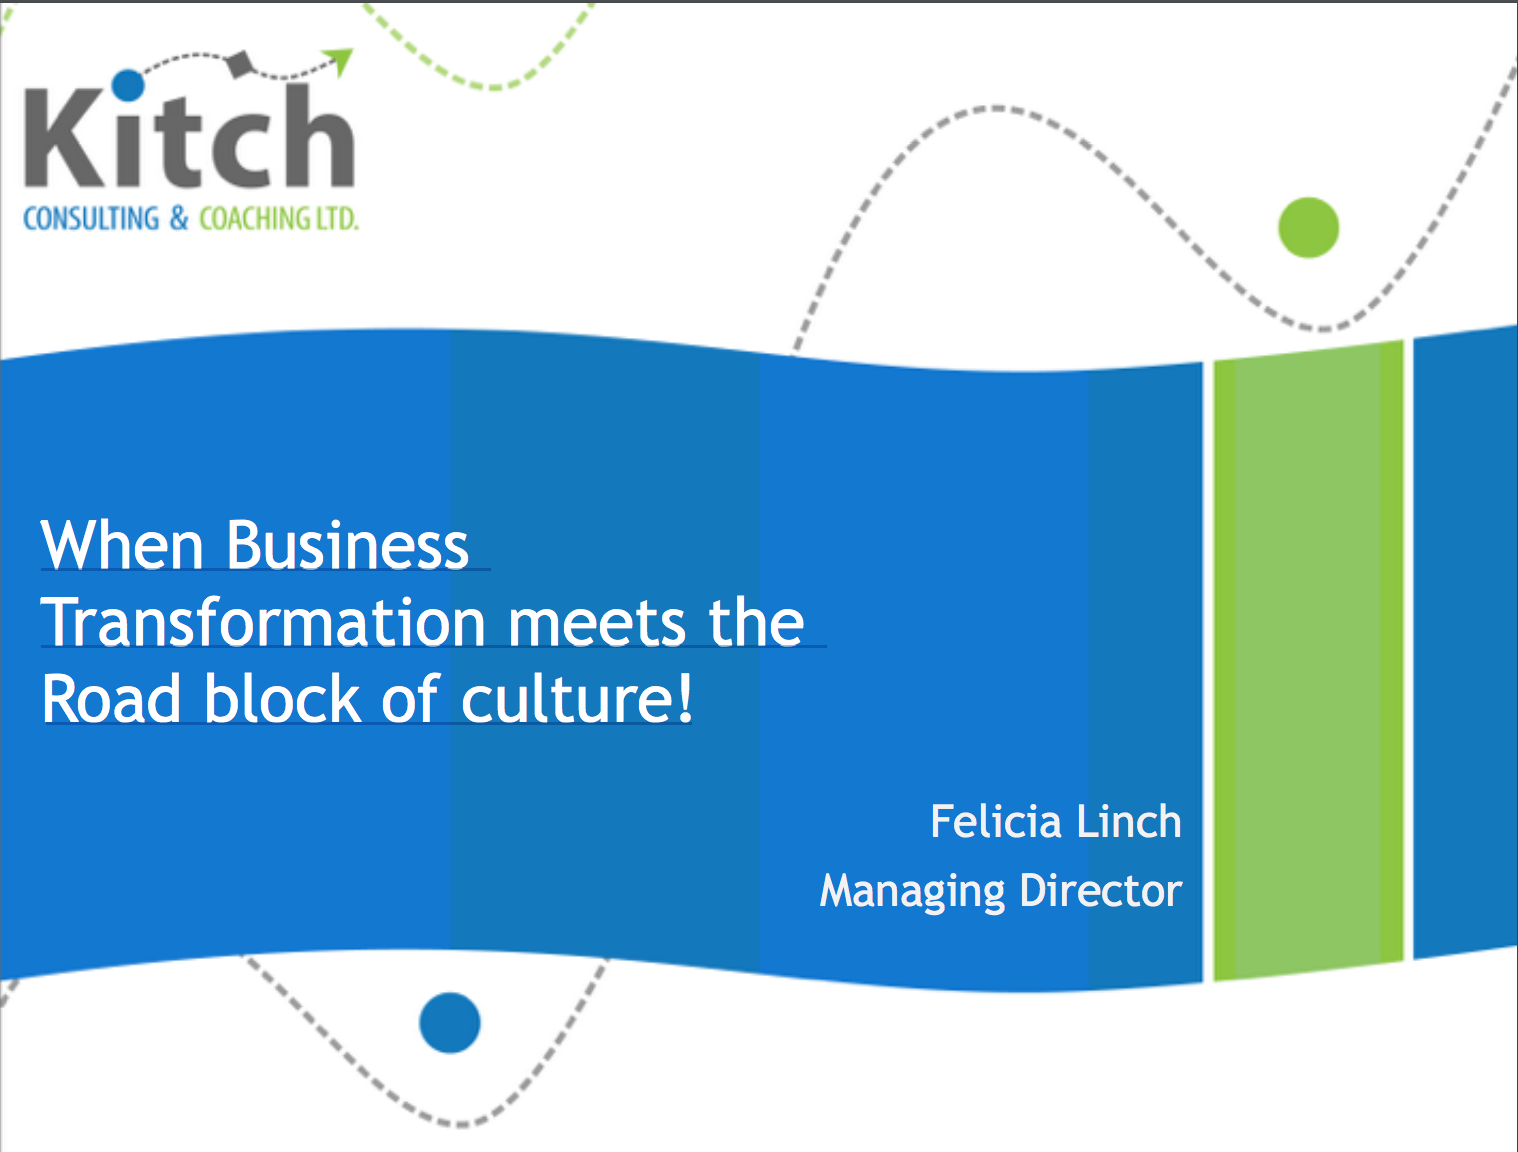 When Business Transformation meets the Road block of culture!